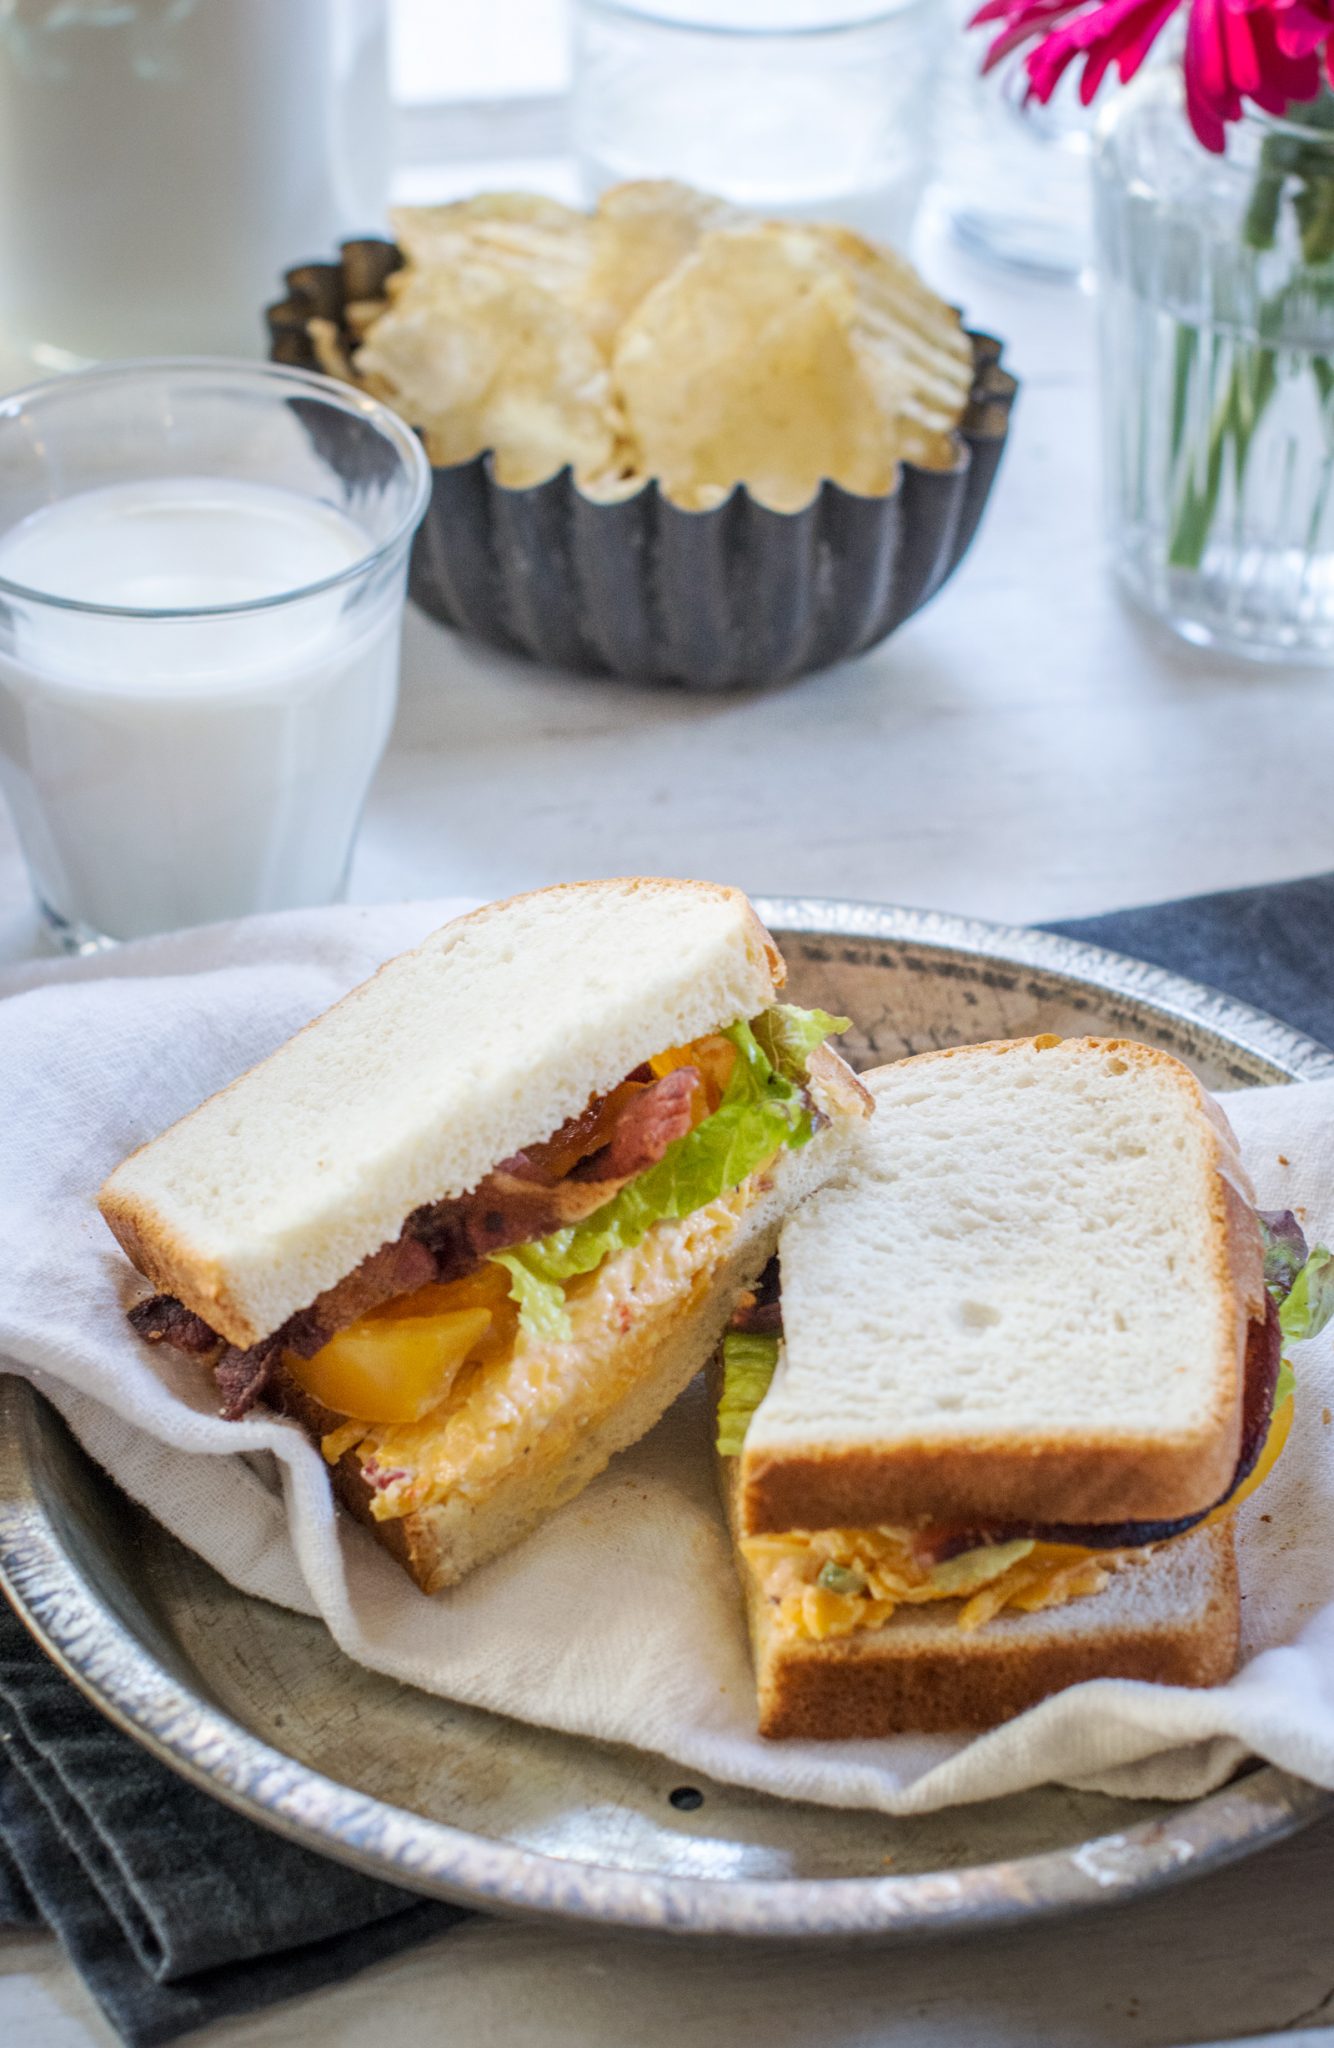 Glass of milk, bowl of potato chips and a sliced BLT sandwich on Pepperidge Farm hearty white bread.